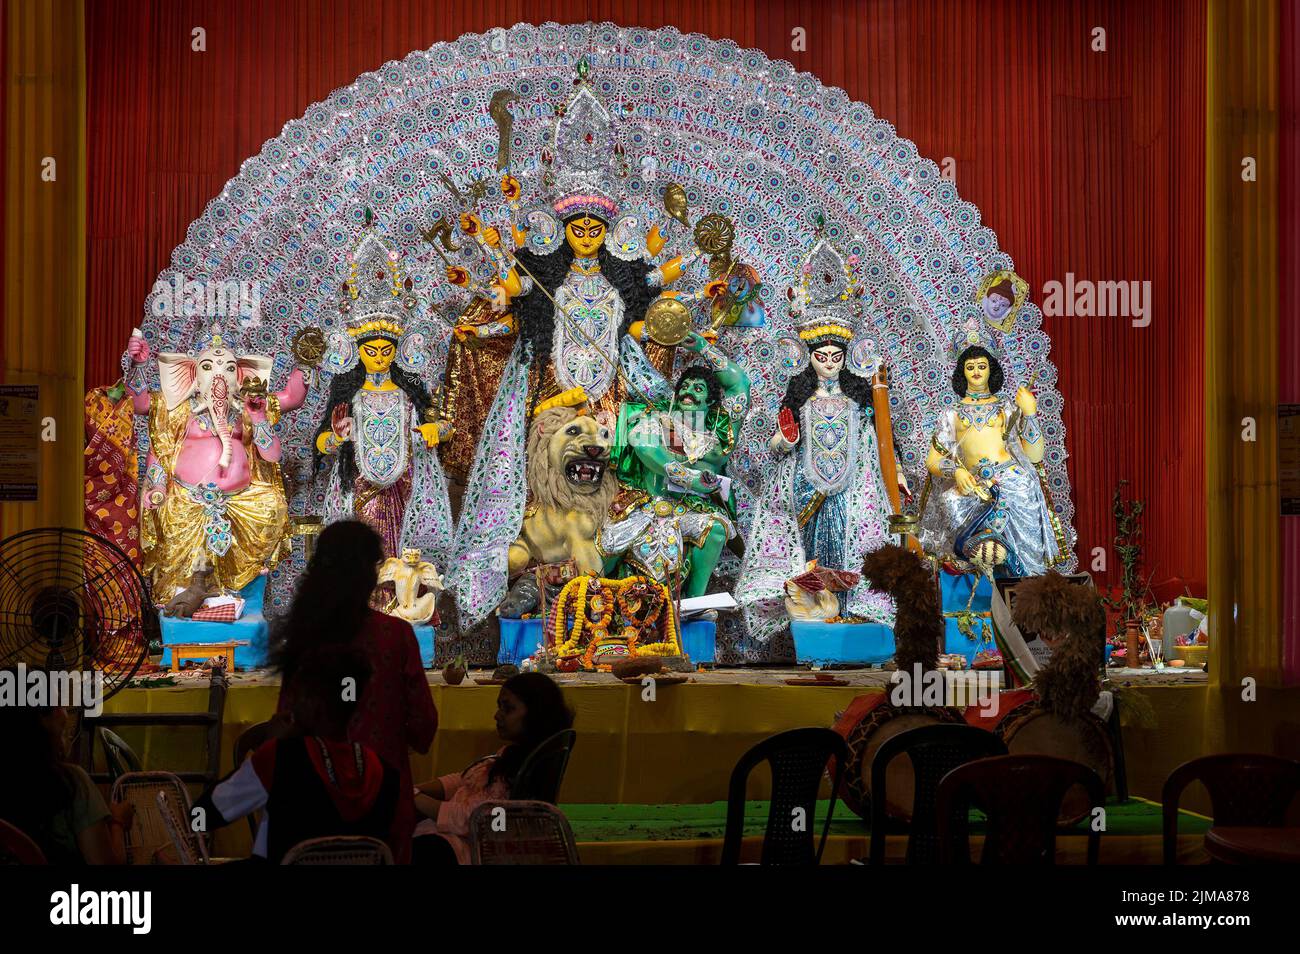 Kolkata, West Bengal, India - 12th October, 2021 : Decorated Durga Puja pandal at night. Biggest festival of Hinduism celebrated all over the world. Stock Photo